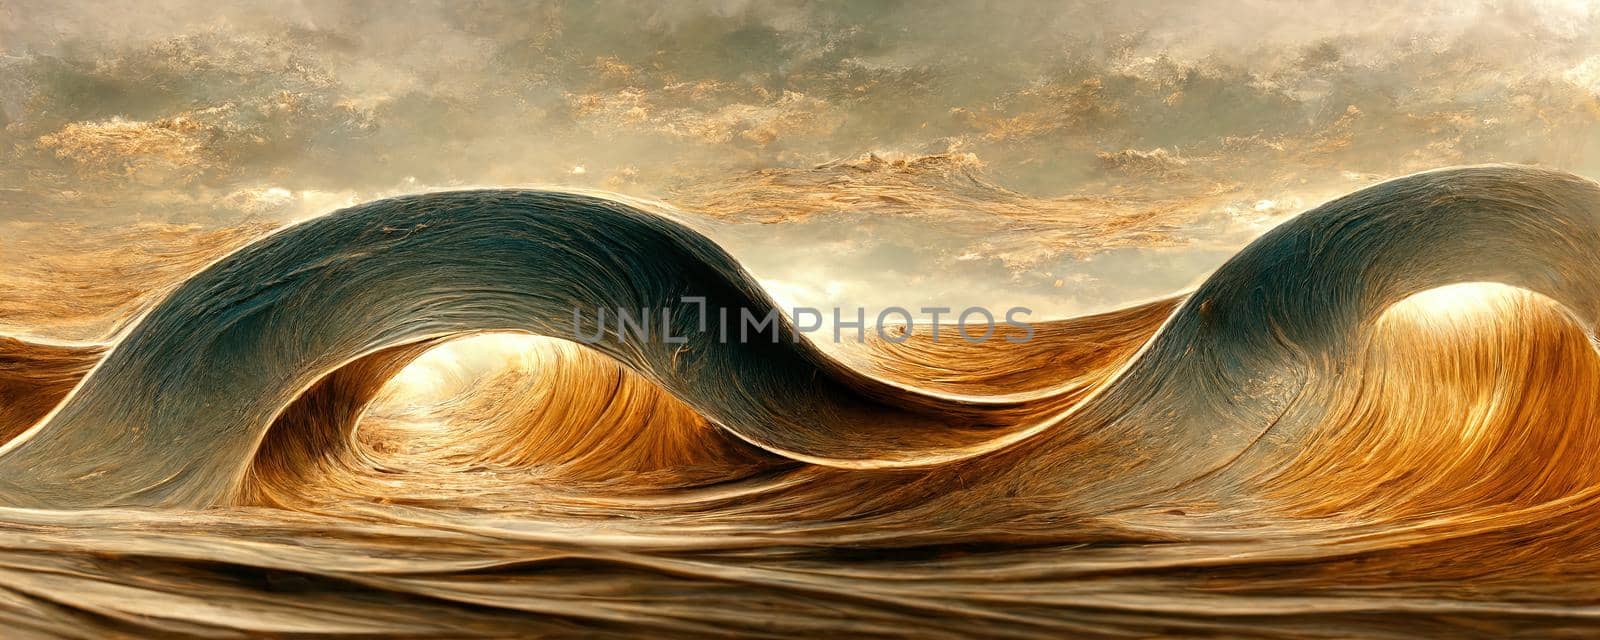 golden waves we are on a stylish background by TRMK